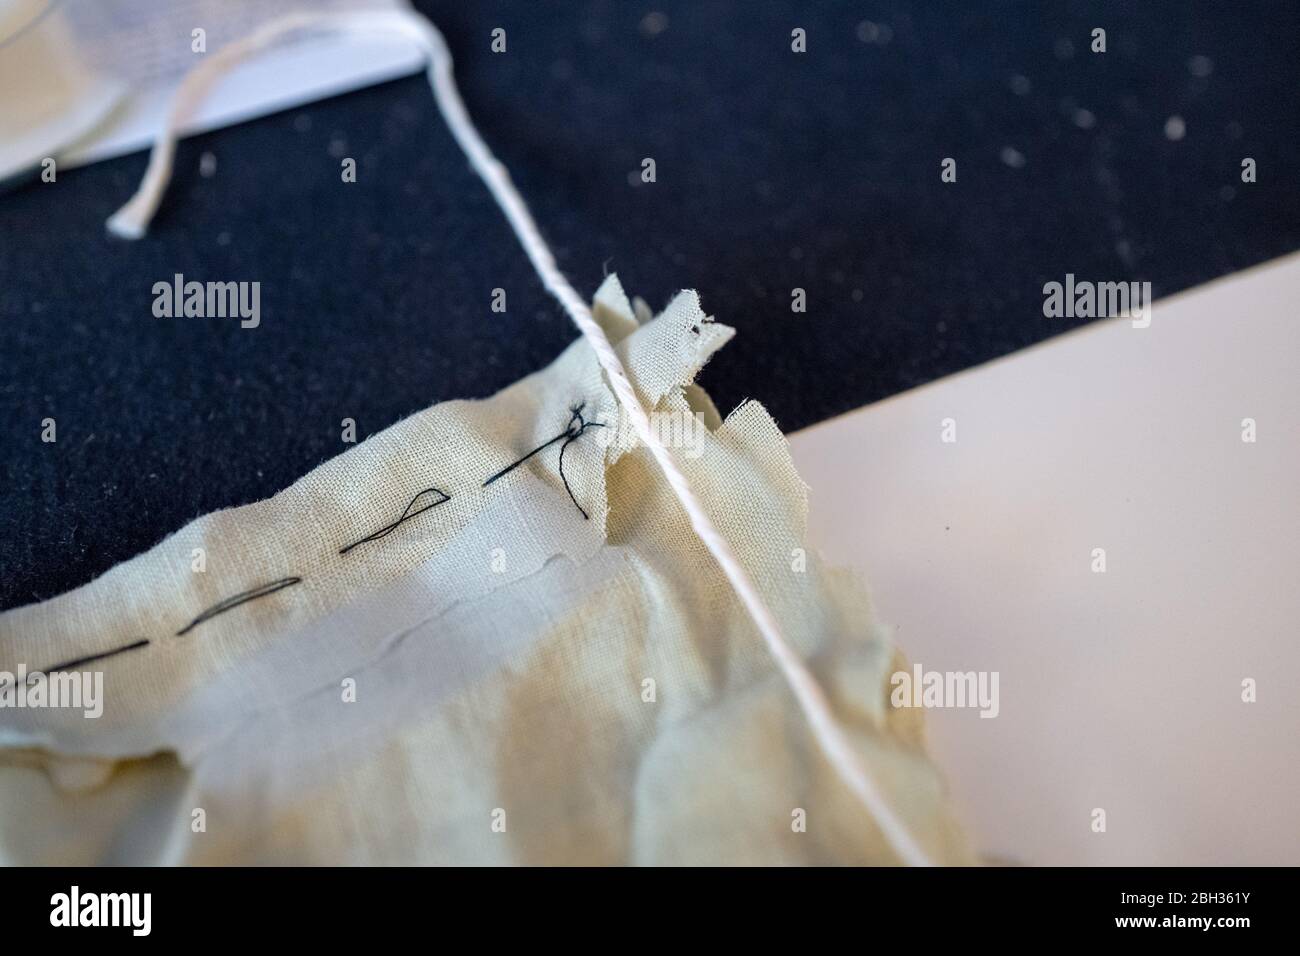 Construction of a homemade cloth face mask, based on the guidelines and sewing directions provided by the Centers for Disease Control and Prevention (CDC), during an outbreak of the COVID-19 coronavirus, San Ramon, California, April 17, 2020. () Stock Photo